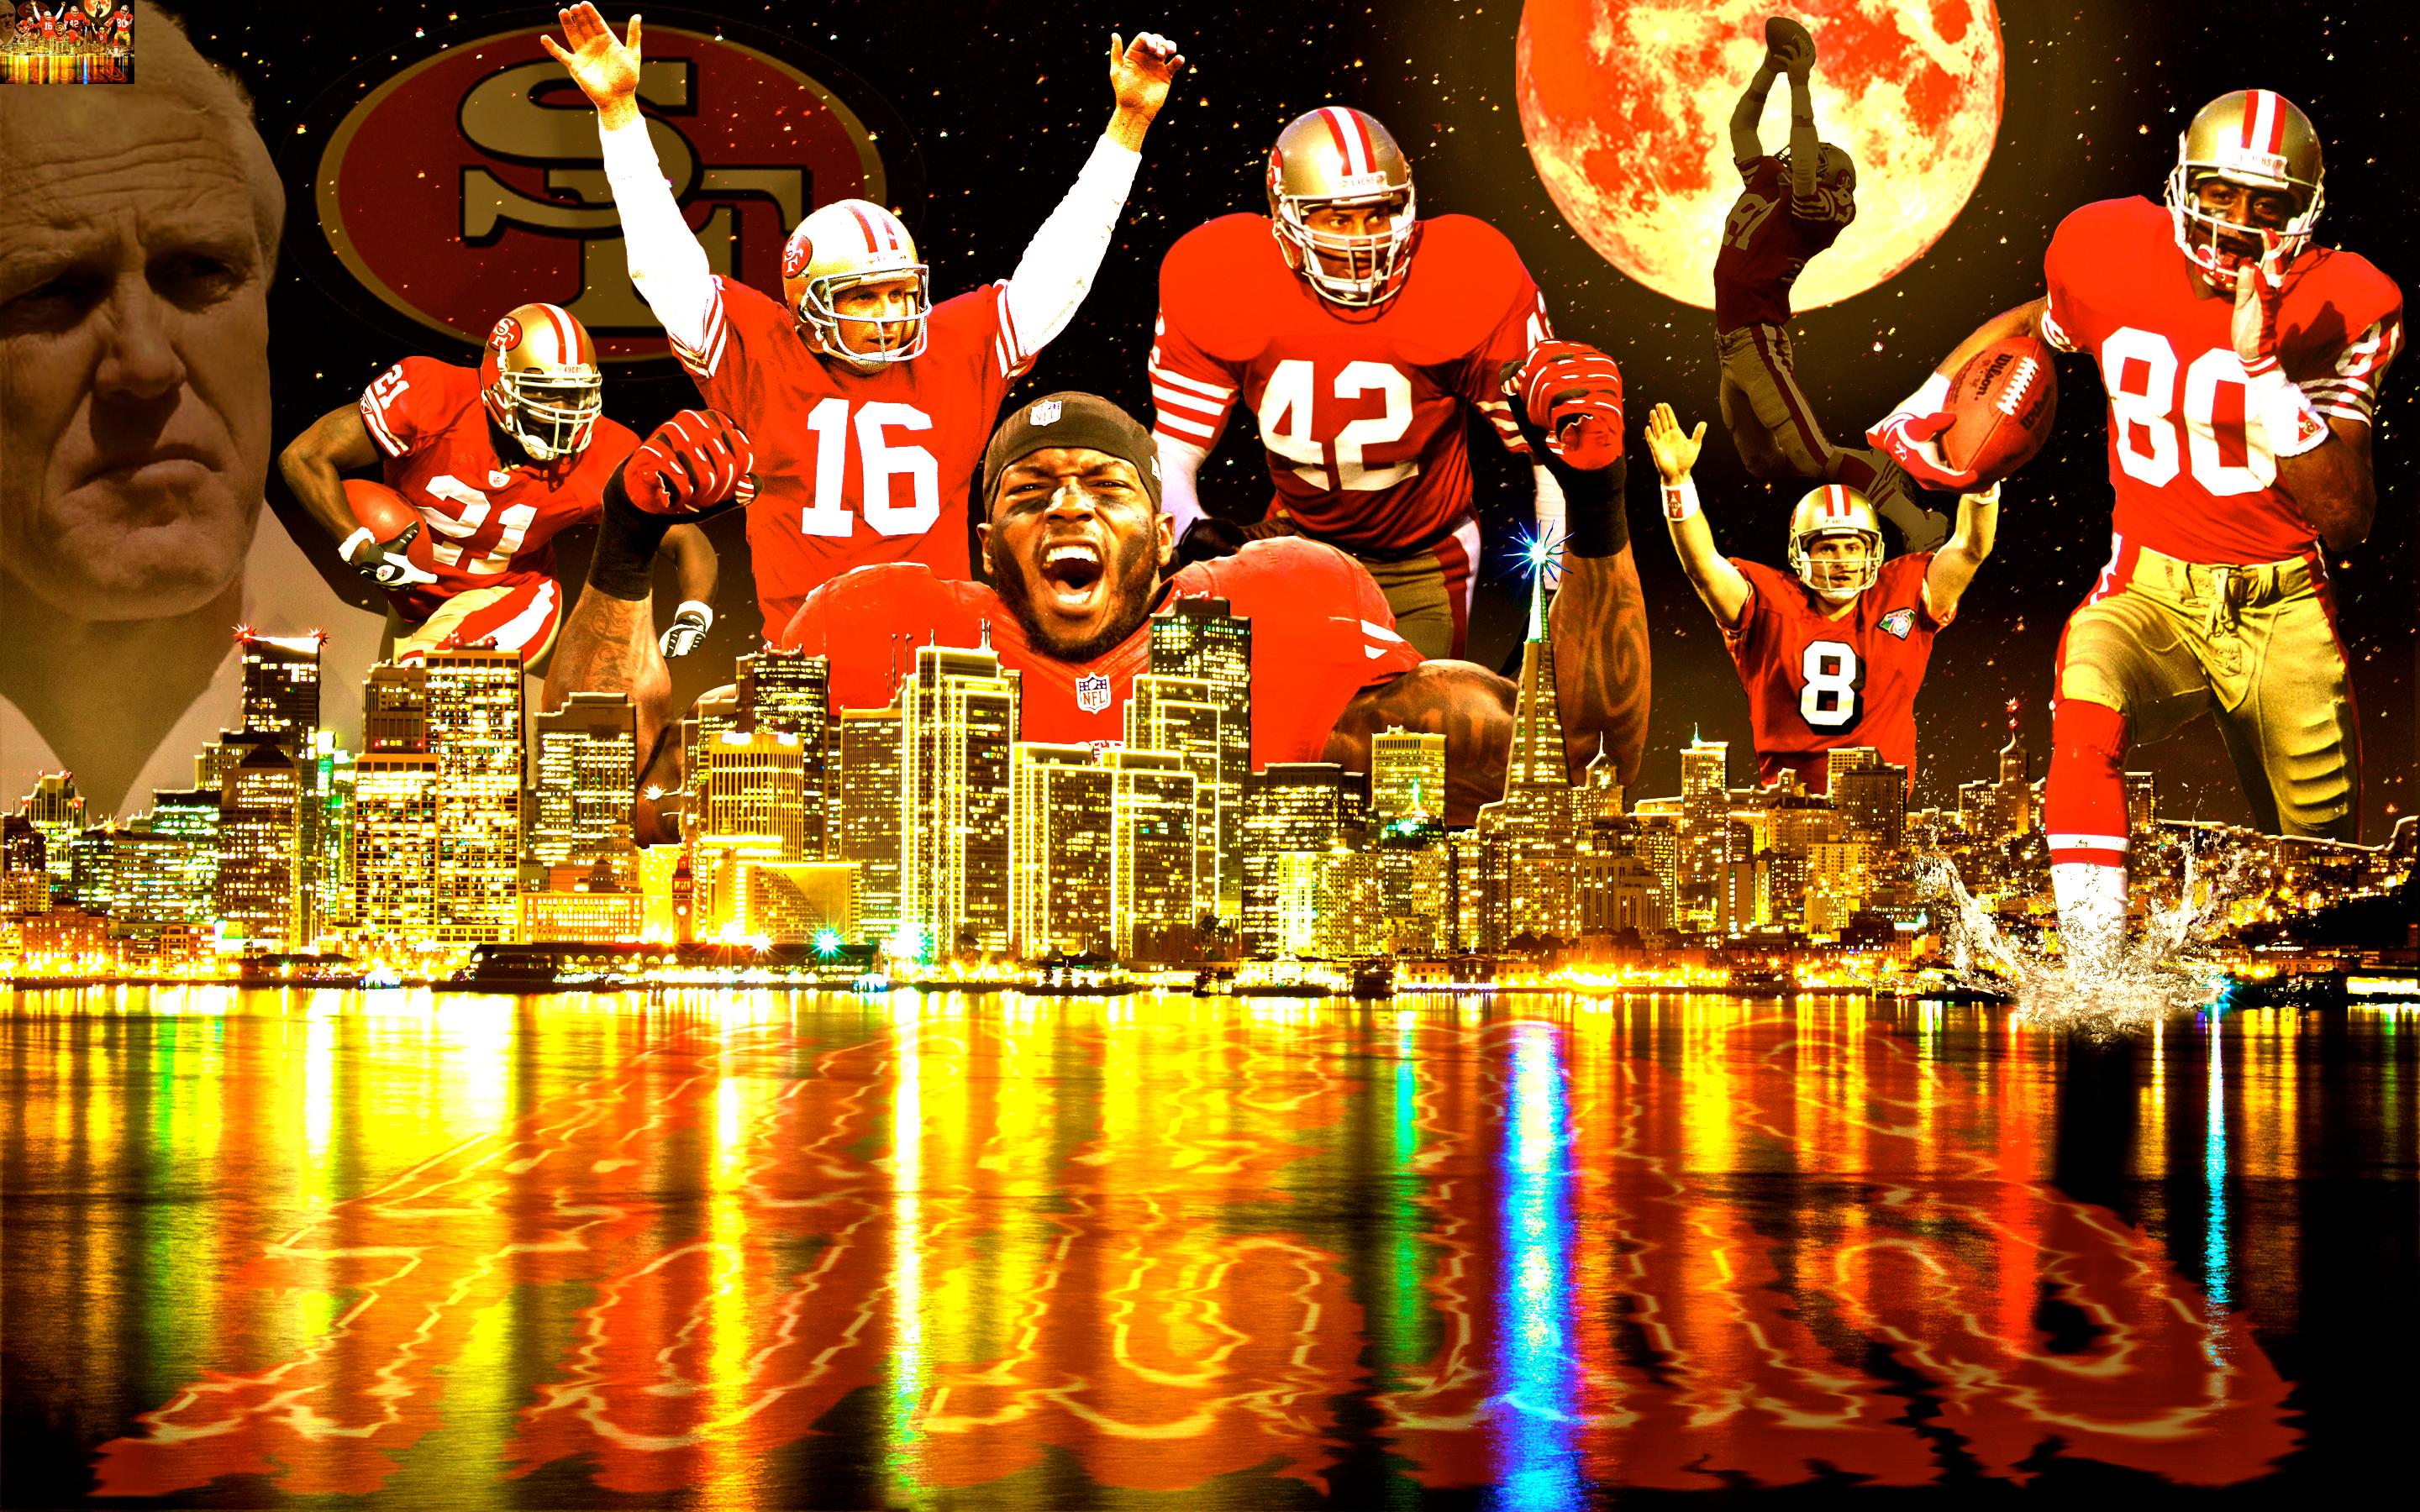 San Francisco 49ers  The  of all wallpapers Peep them all at 49erscom wallpapers  Facebook